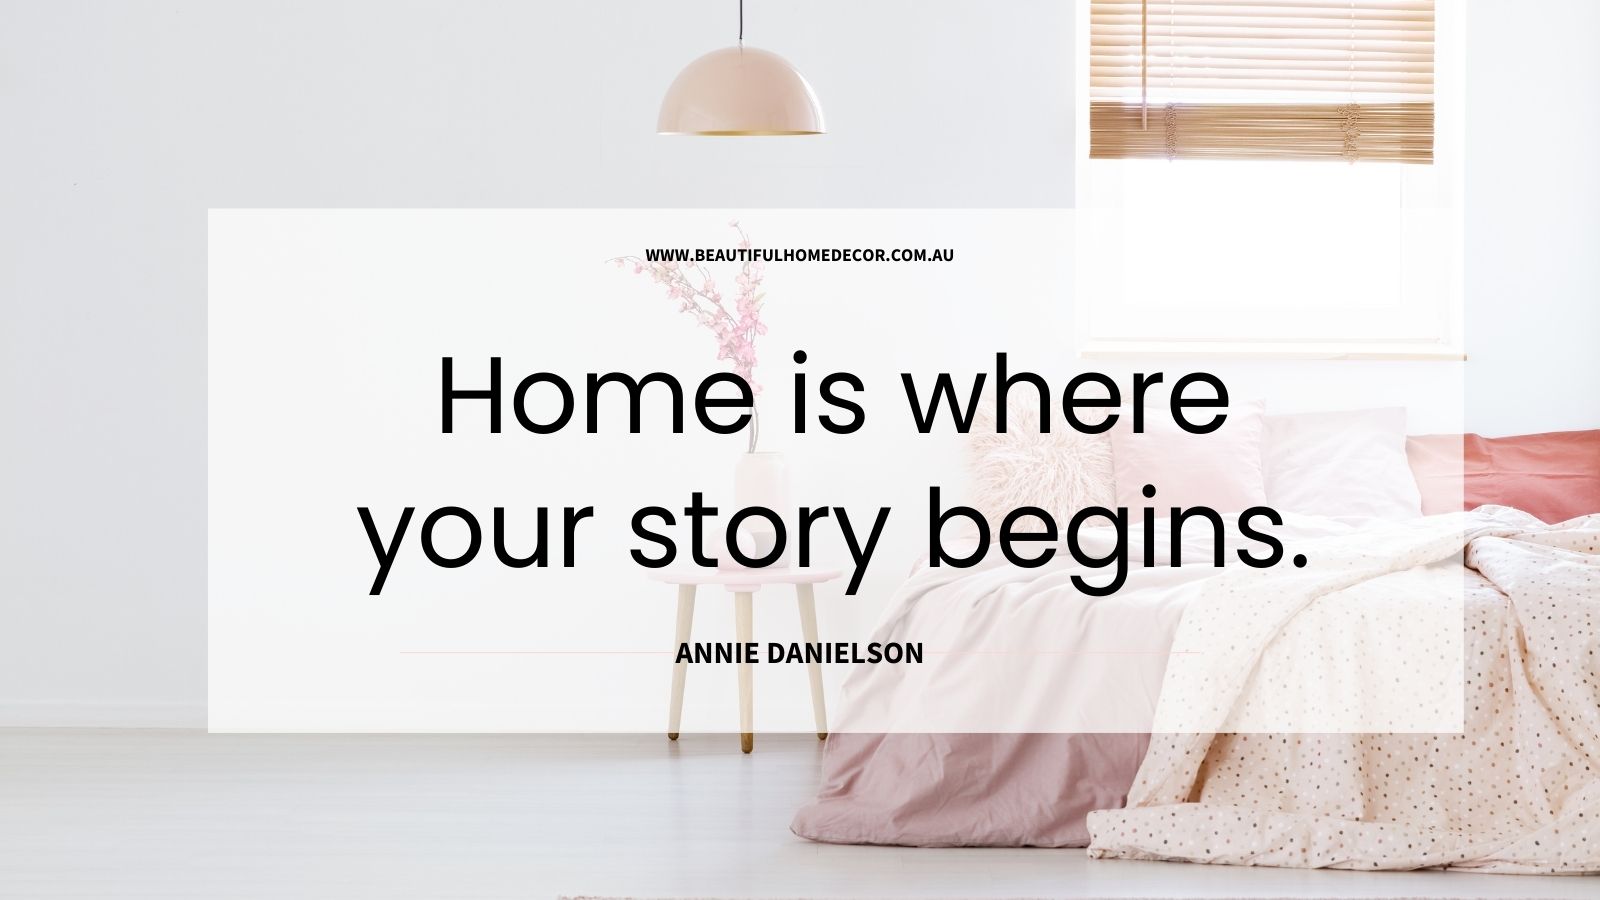 Home is where your story begins Home Styling Tips Beautiful Home Decor